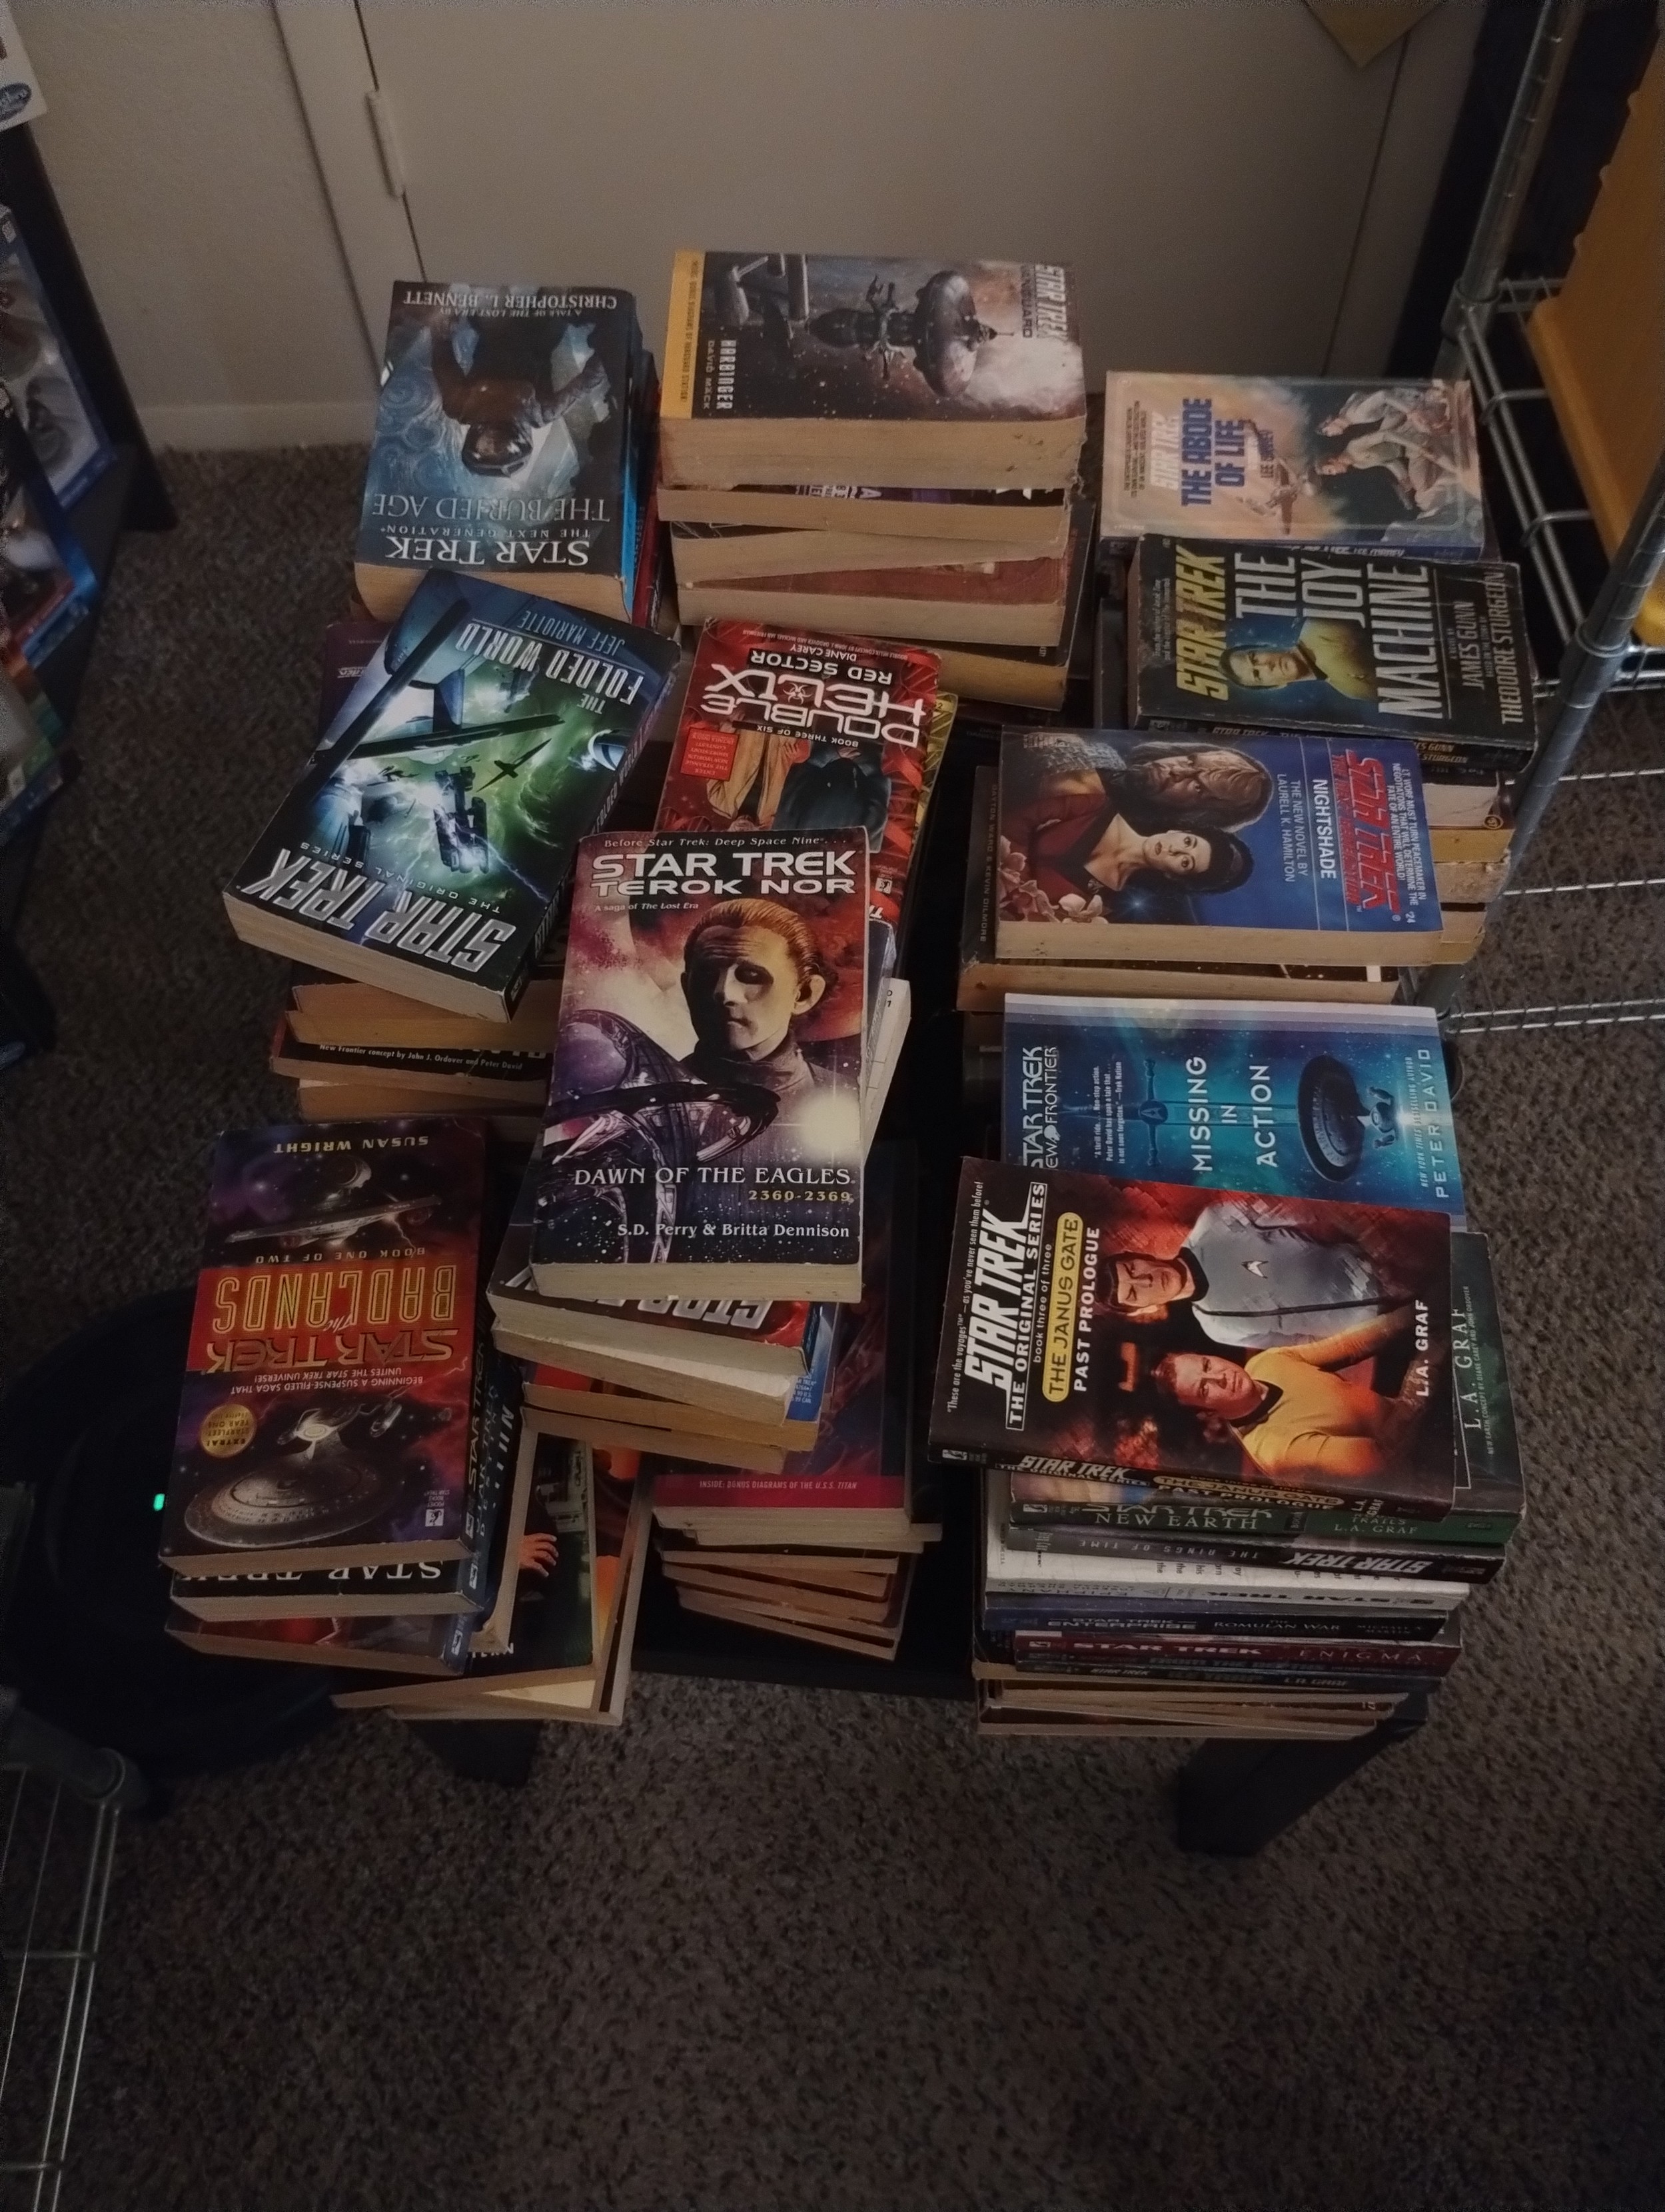 Group of at least 110 Star Trek Books from TNG, TOS and DS9 found at a yard sale for $10.00 for the group